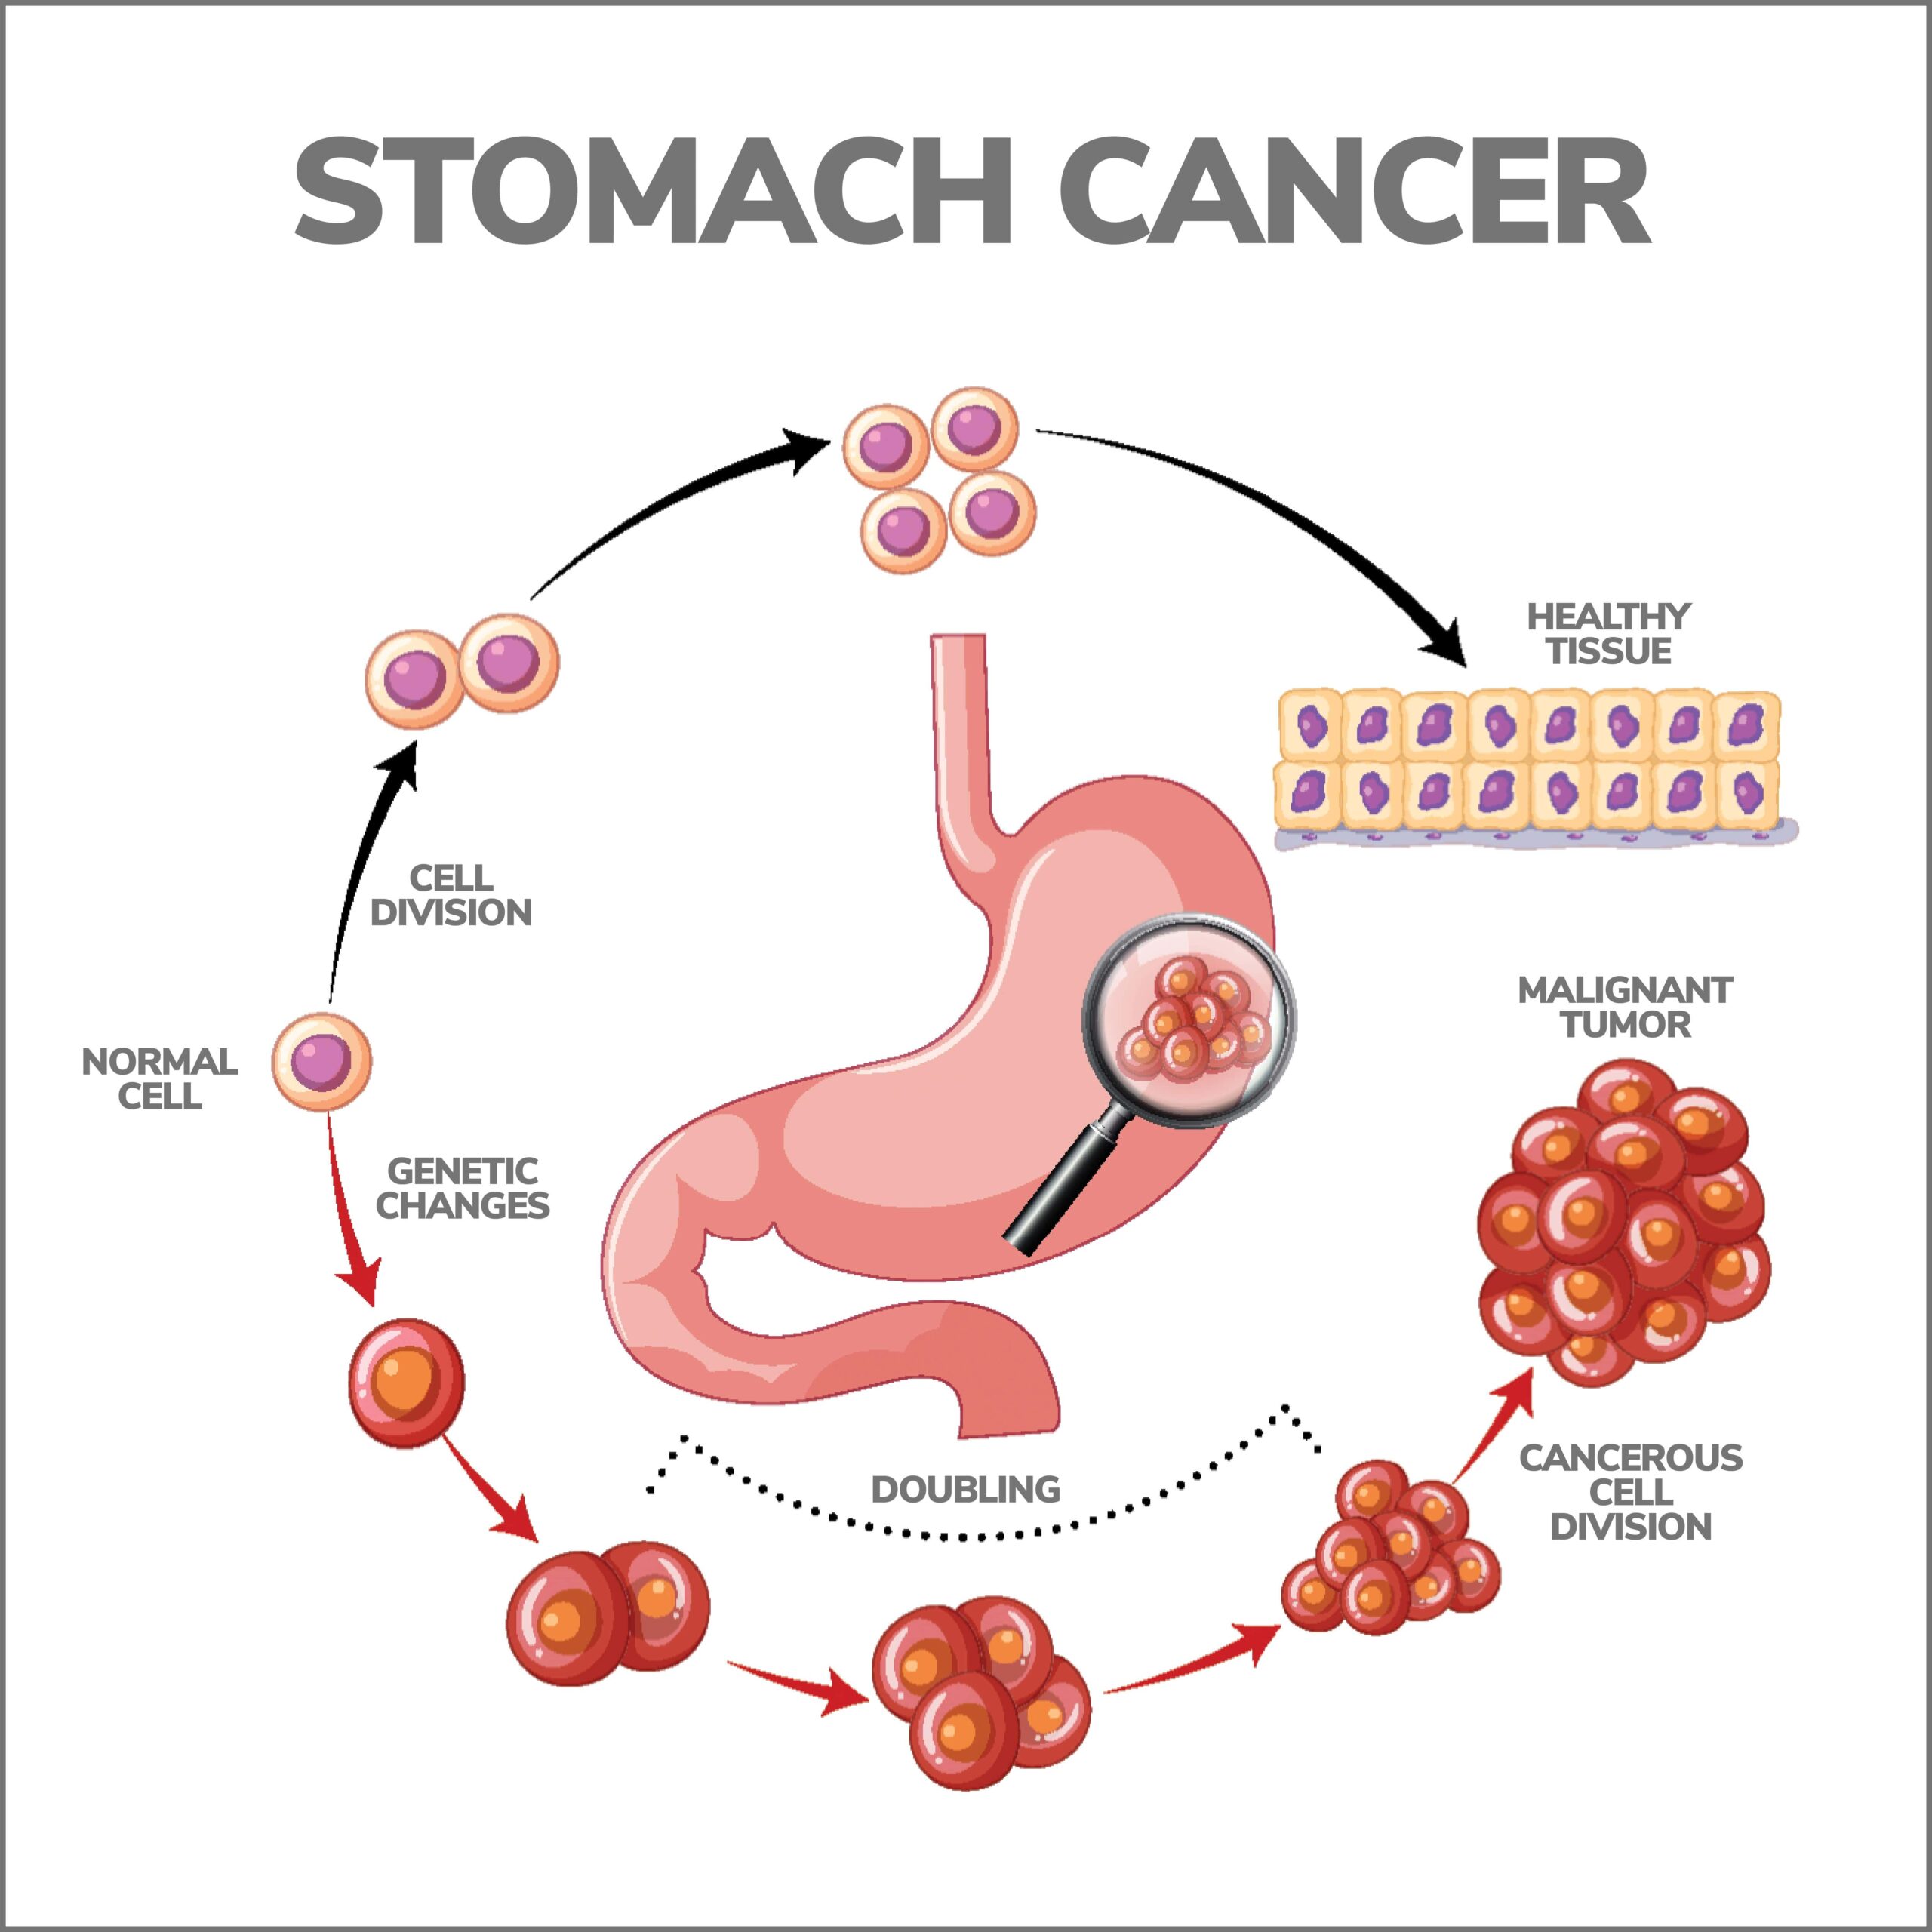 Understanding the Progression of Stomach Cancer: How Fast Does it Spread?